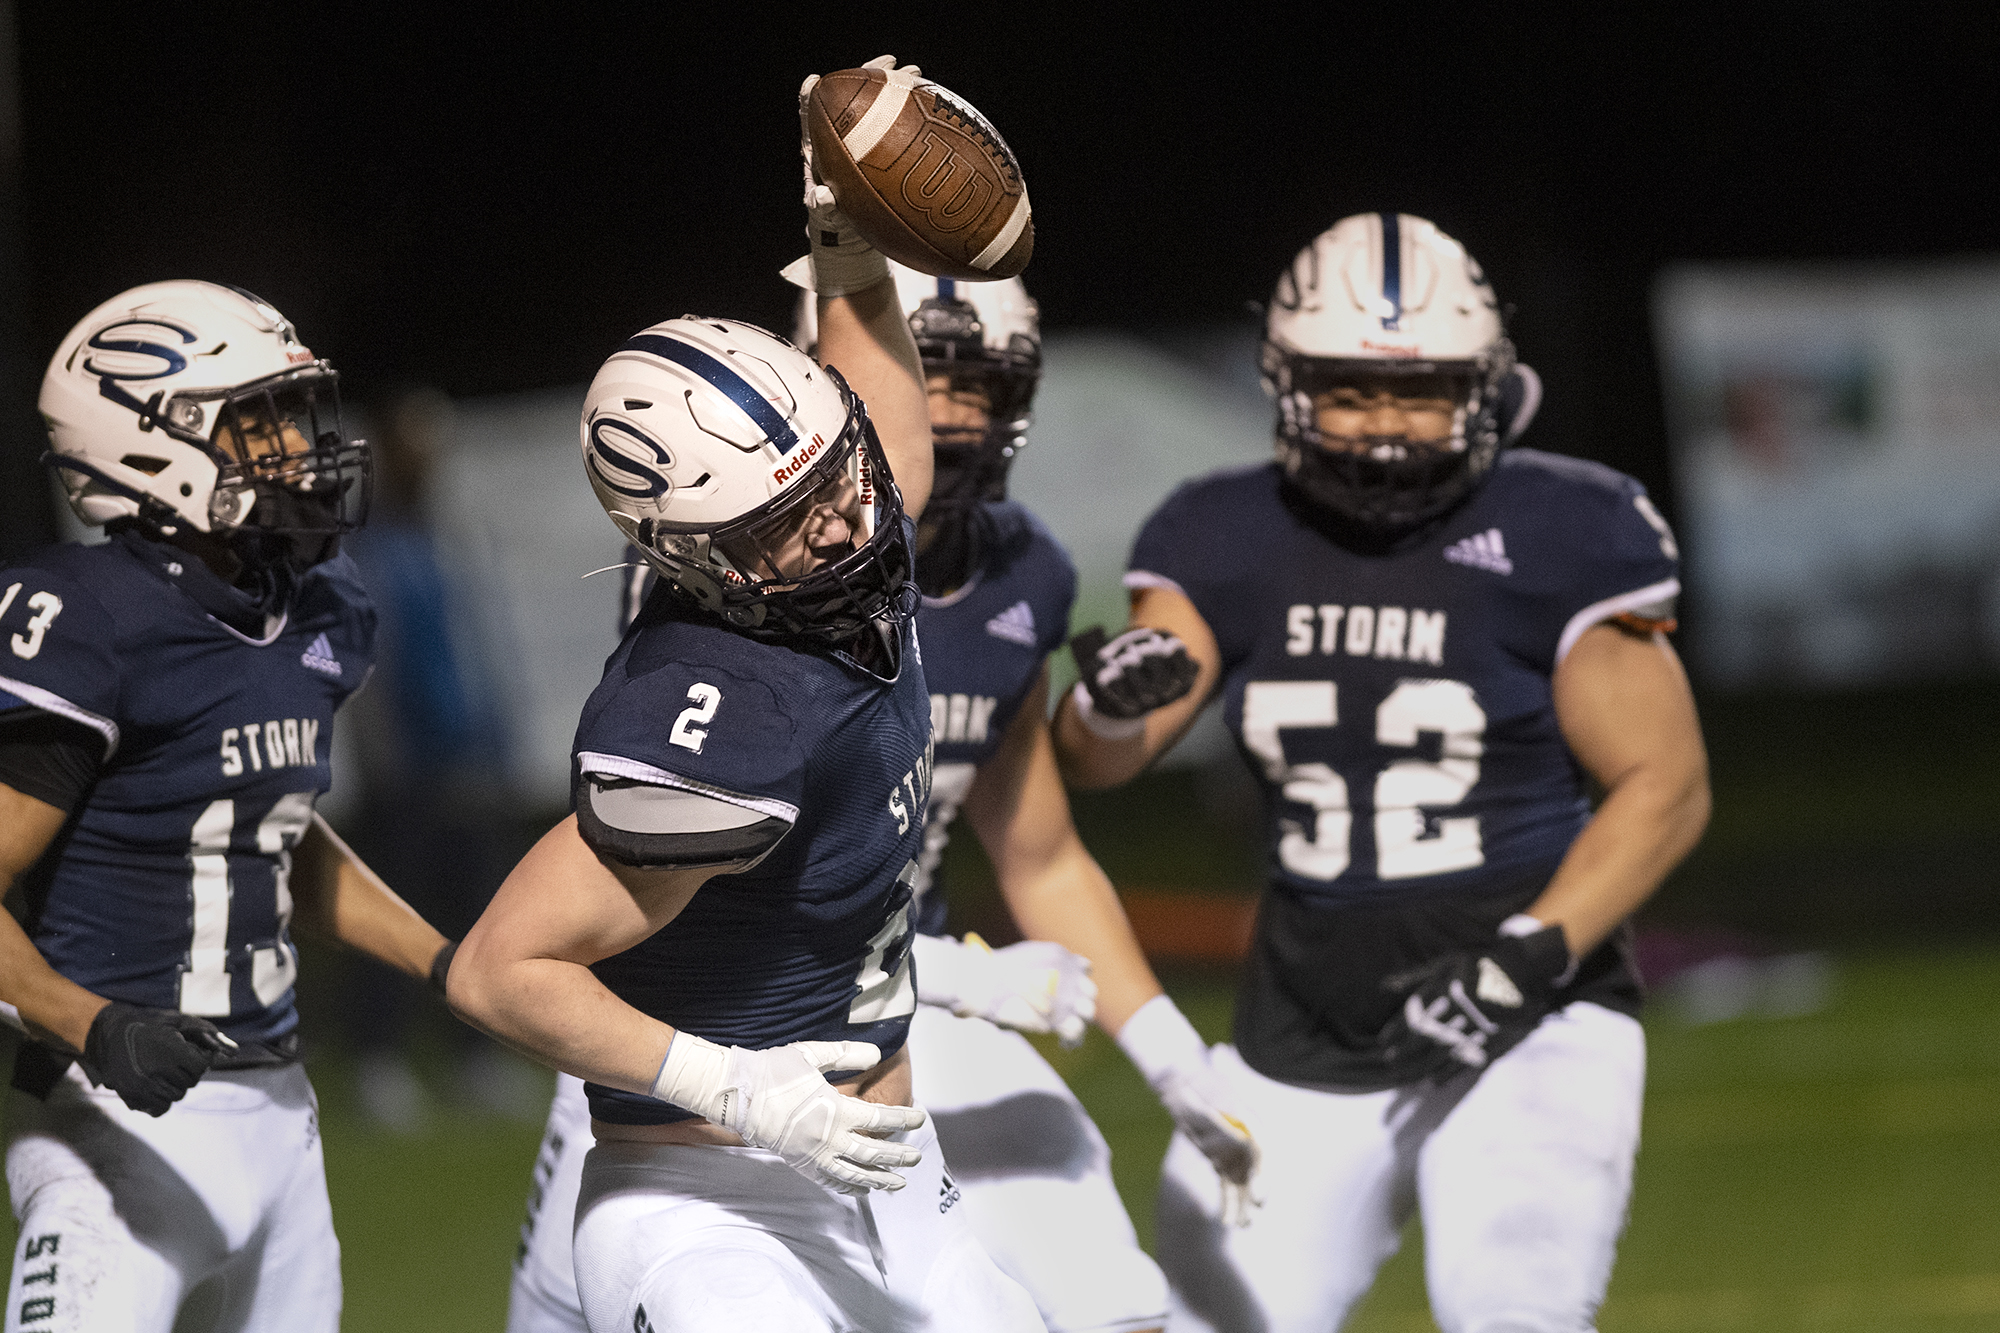 Skyview’s Rhett Sarvala spikes the ball after a one-handed 30-yard touchdown catch in a 4A/3A Greater St. Helens League game on Thursday, March 18, 2021, at Kiggins Bowl. Skyview won 49-7.